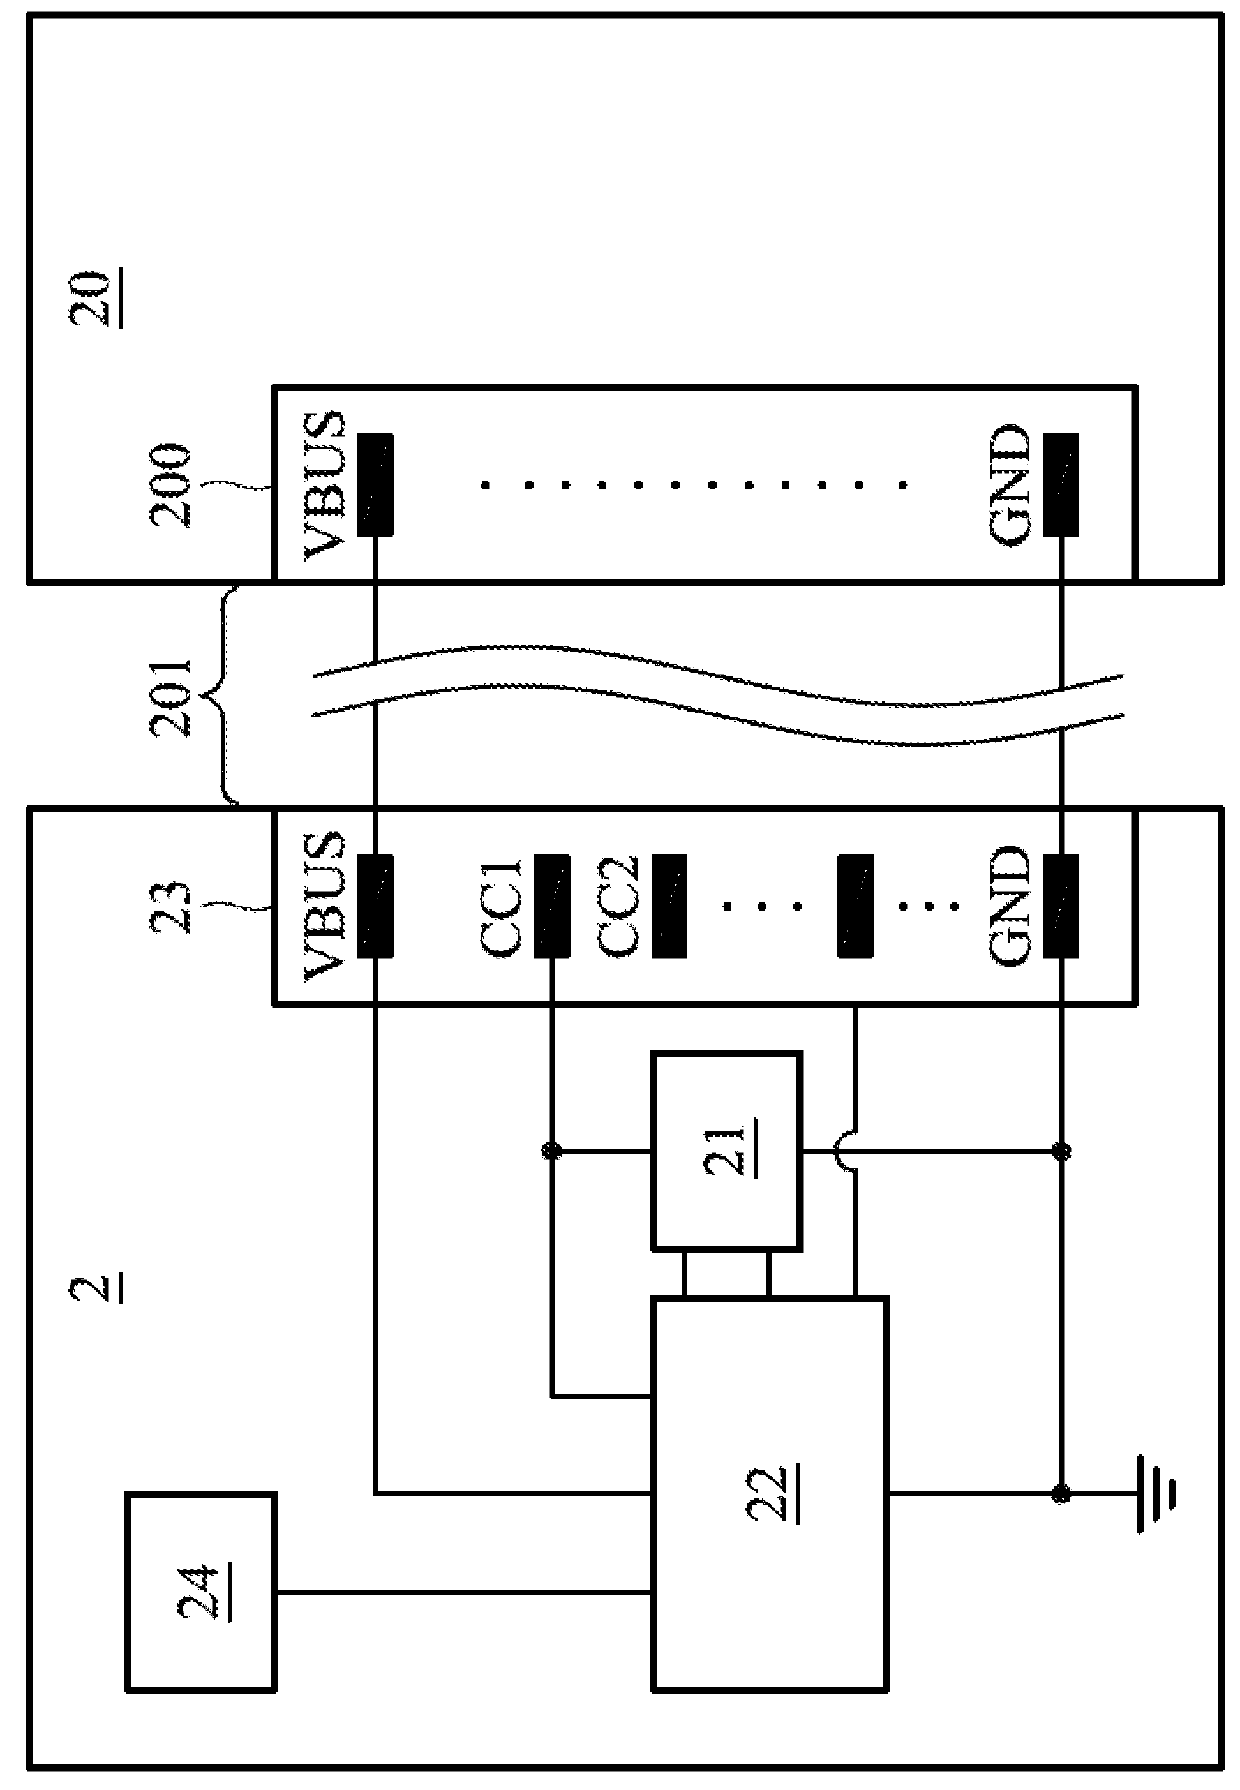 Power-up control circuit and mobile power bank